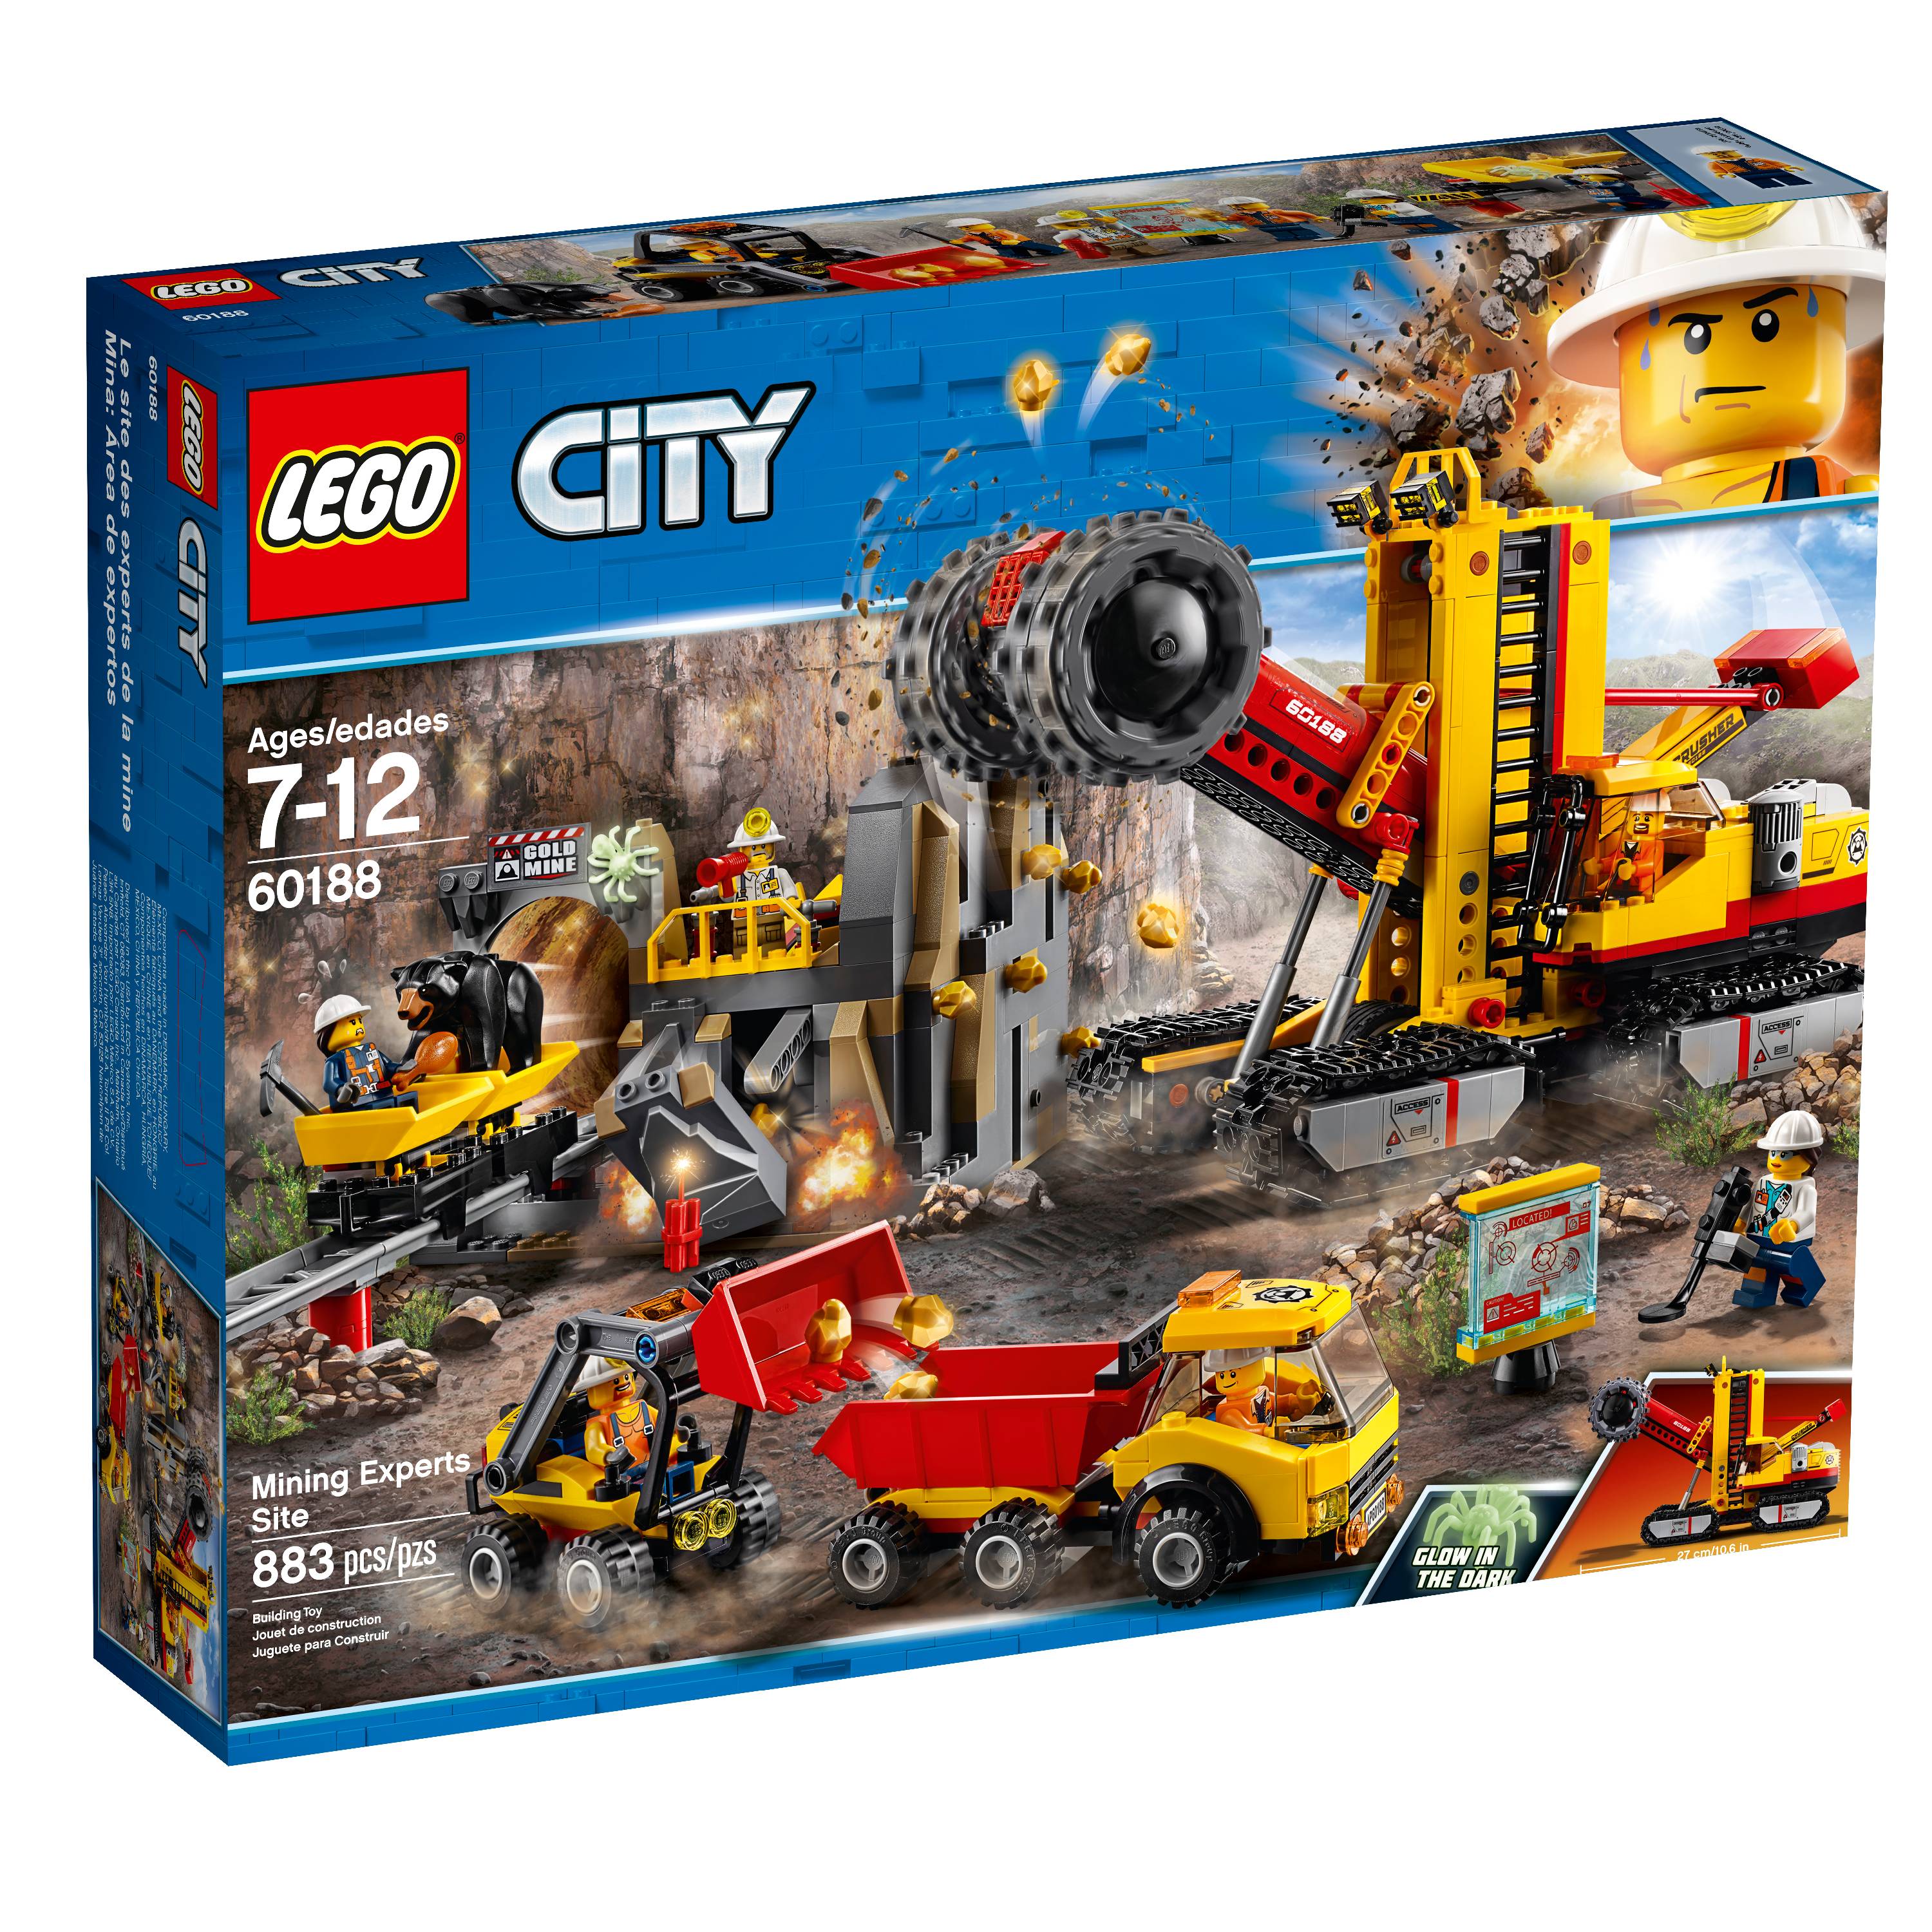 LEGO City Mining Experts Site 60188 Building Set (883 Pieces) - image 4 of 7